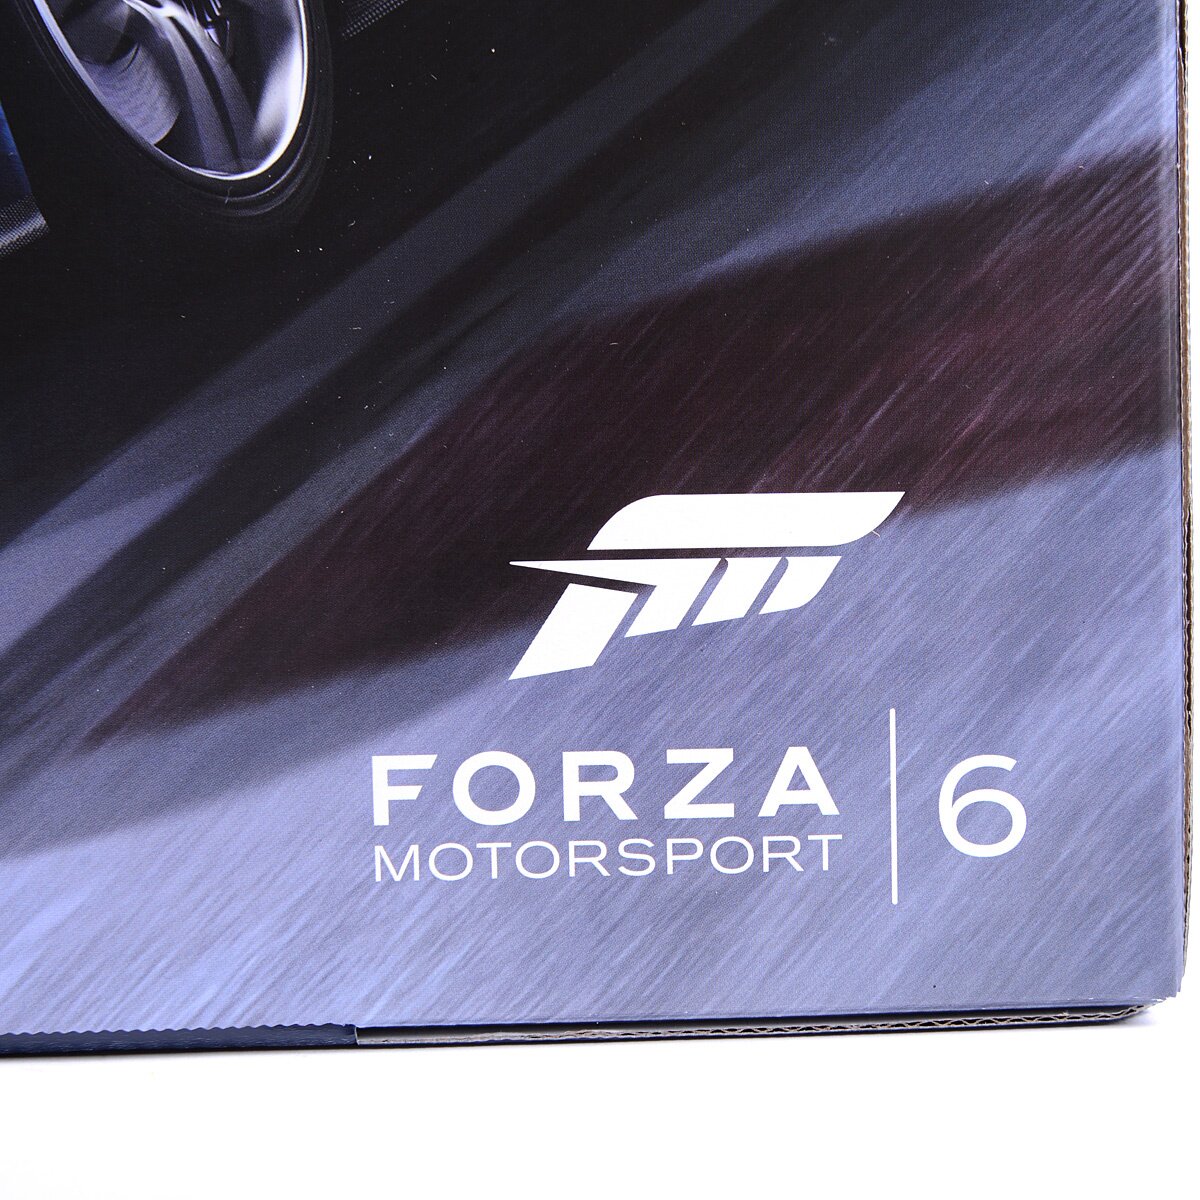 Forza Motorsport 6 Ultimate Edition -, Xbox One